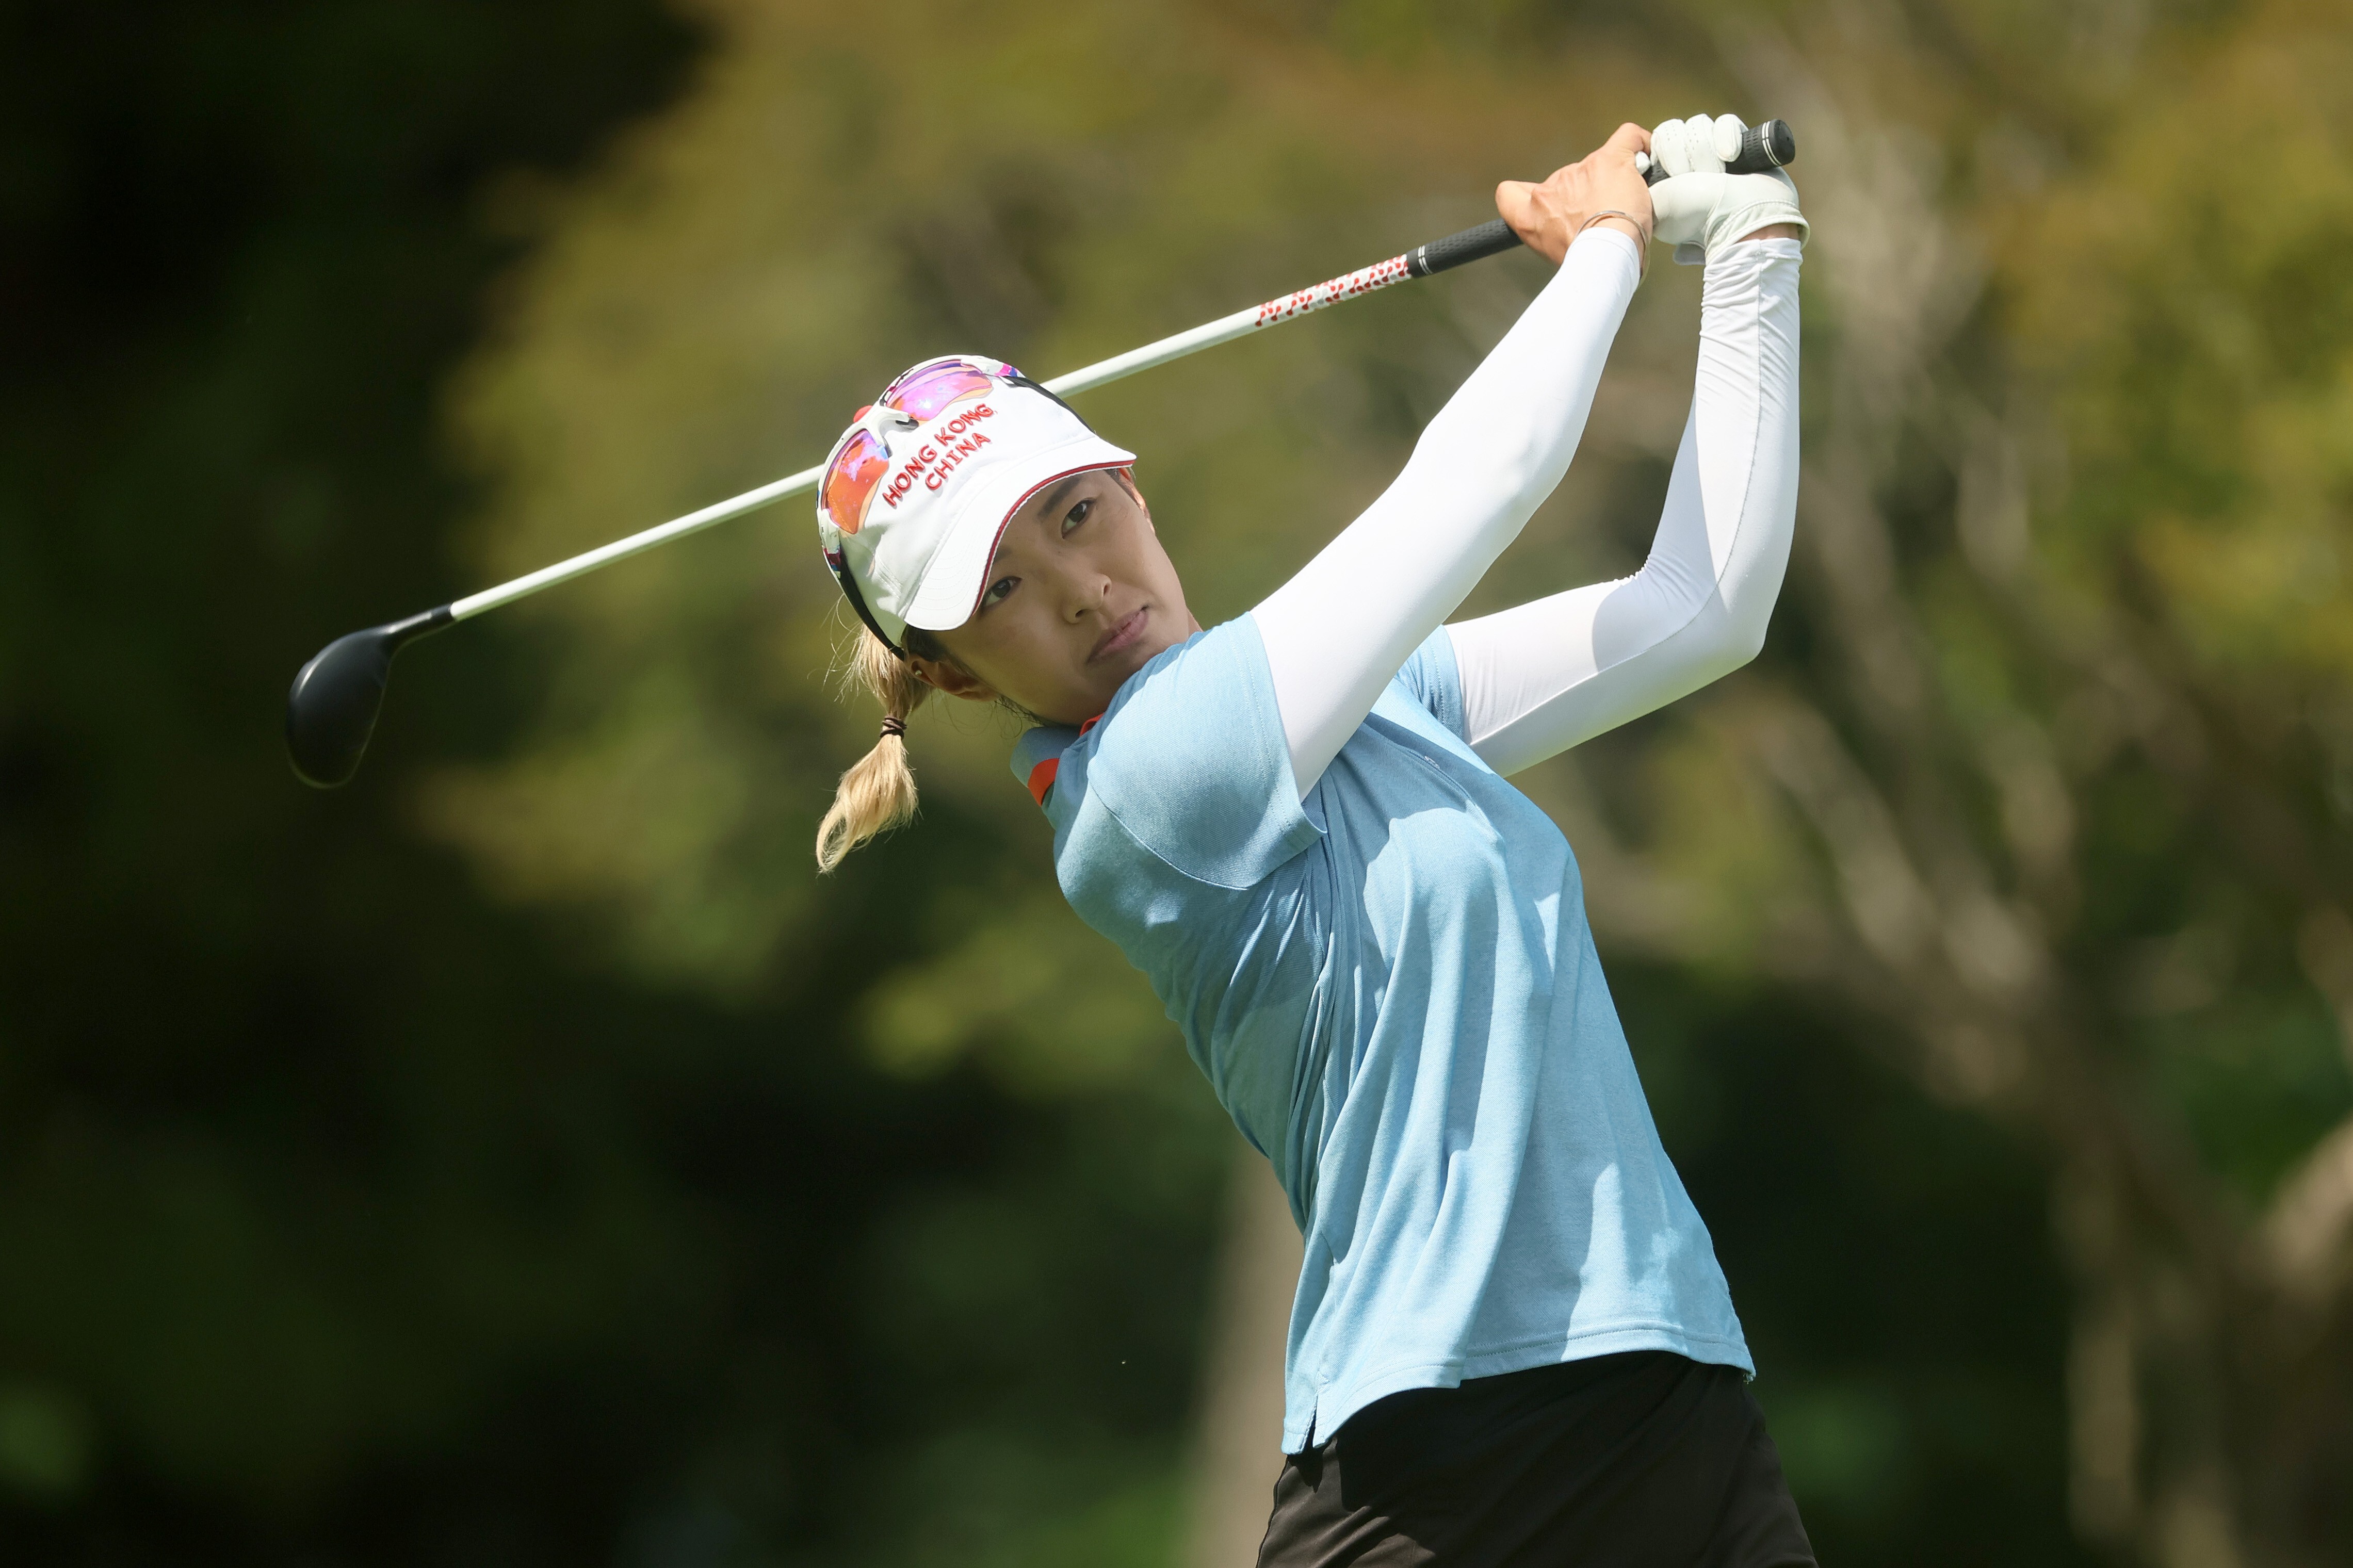 Hong Kong‘s Tiffany Chan struggled in the opening round of the women’s event at Kasumigaseki Country Club. Photo: Getty images